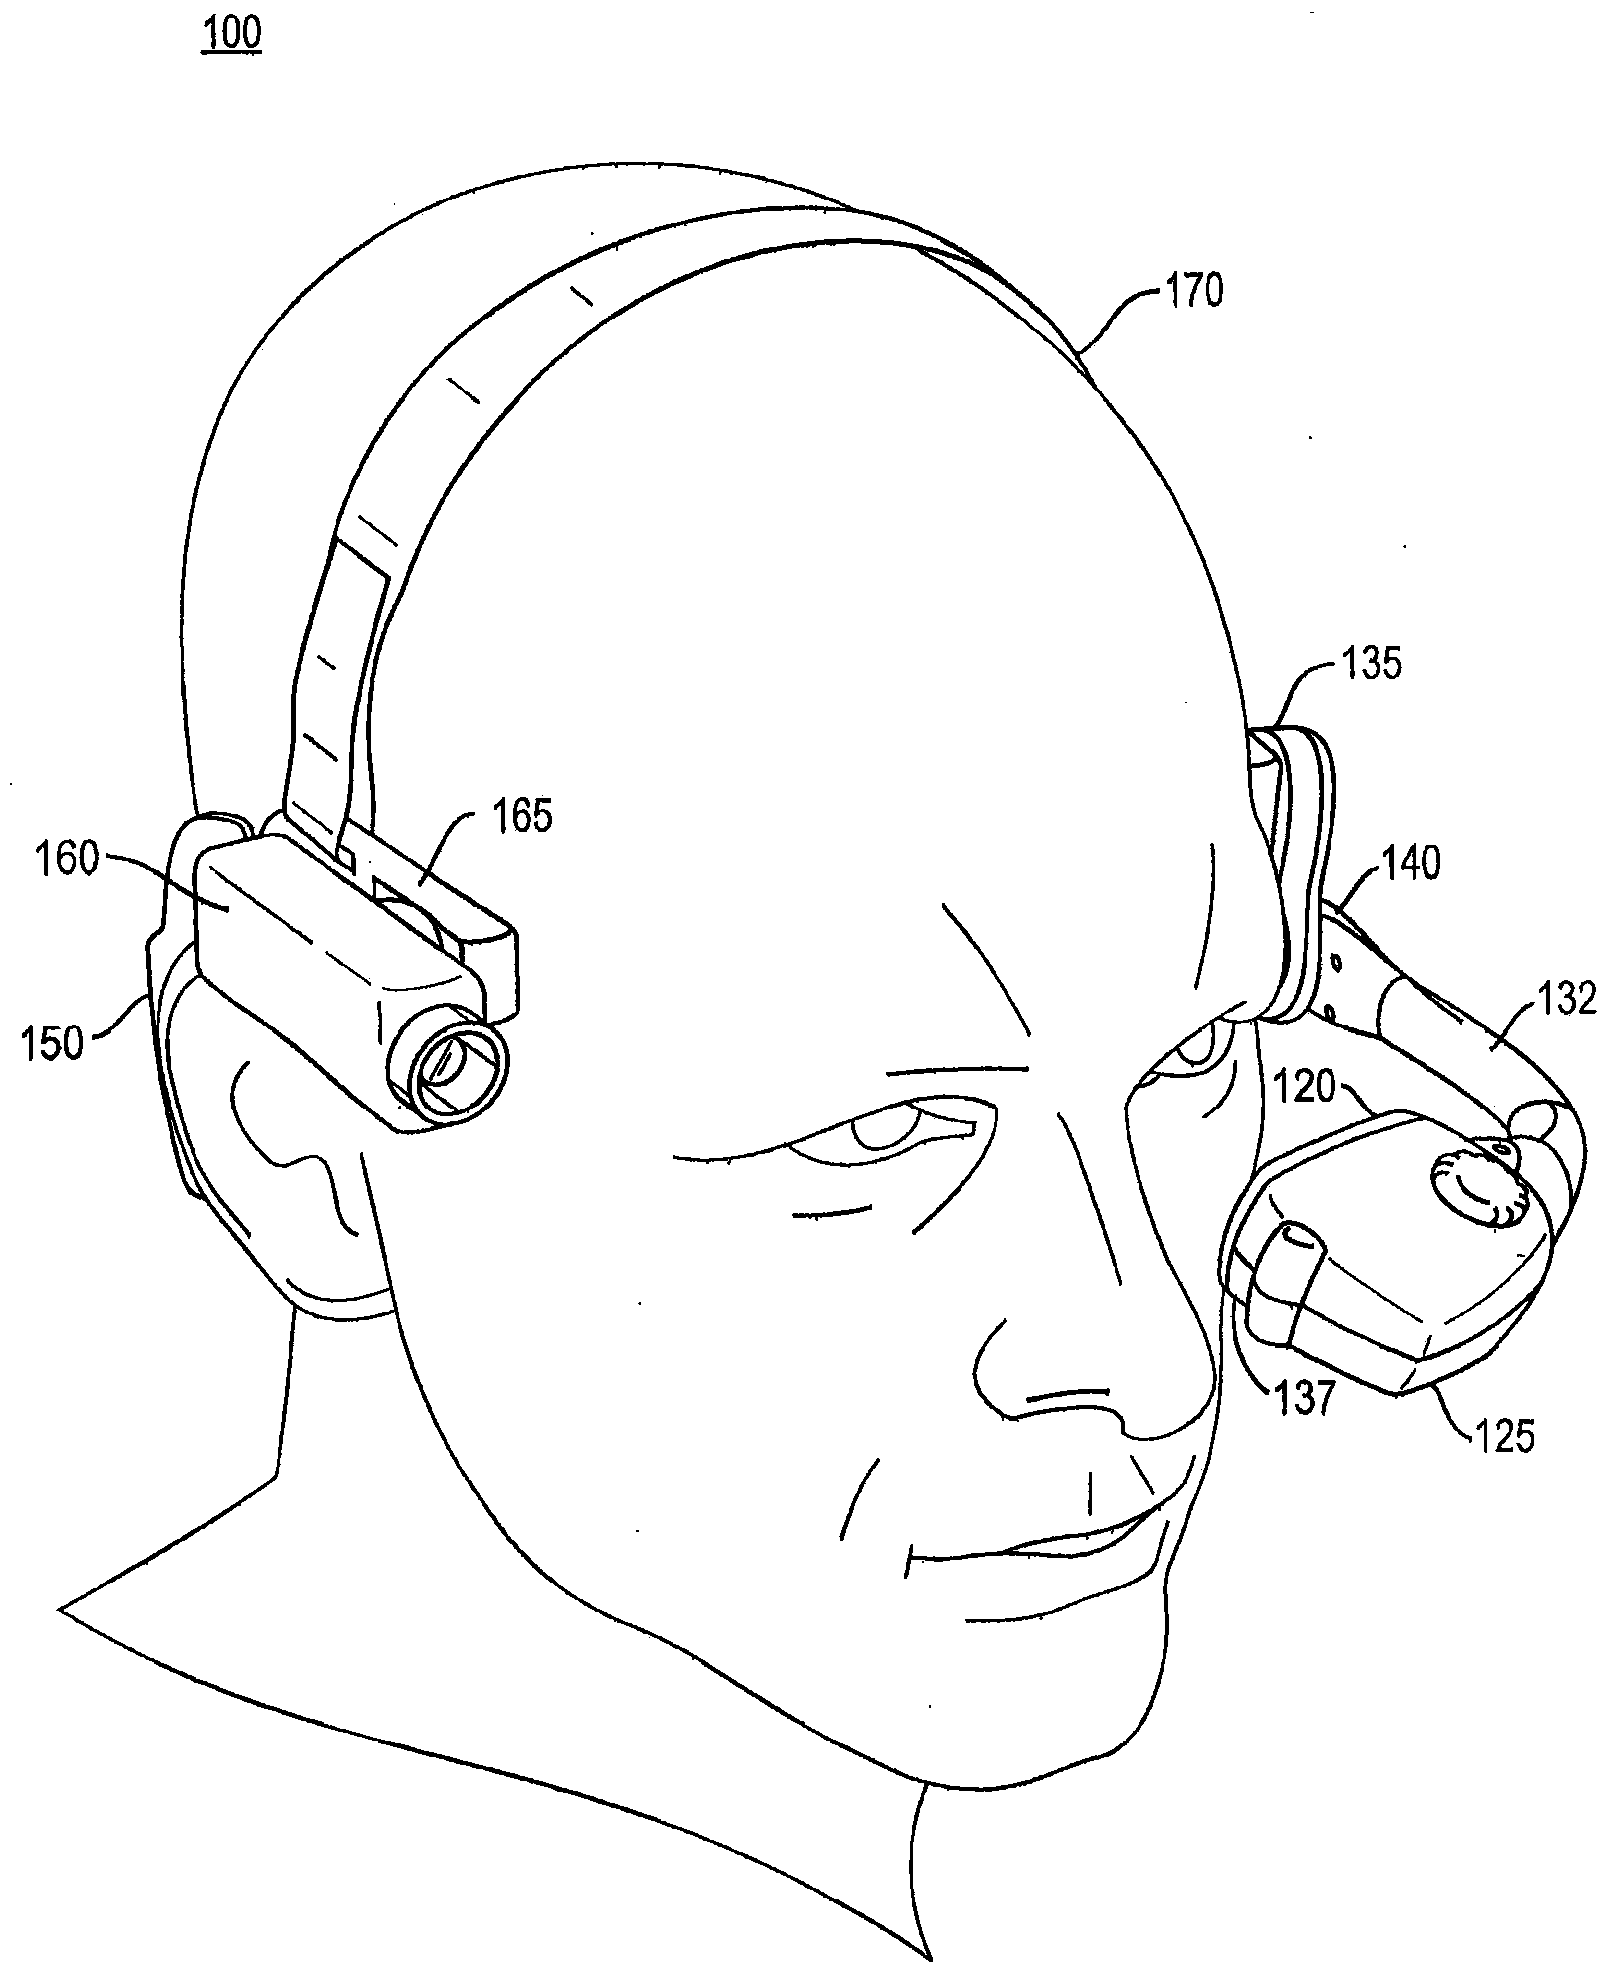 Headset computer that uses motion and voice commands to control information display and remote devices